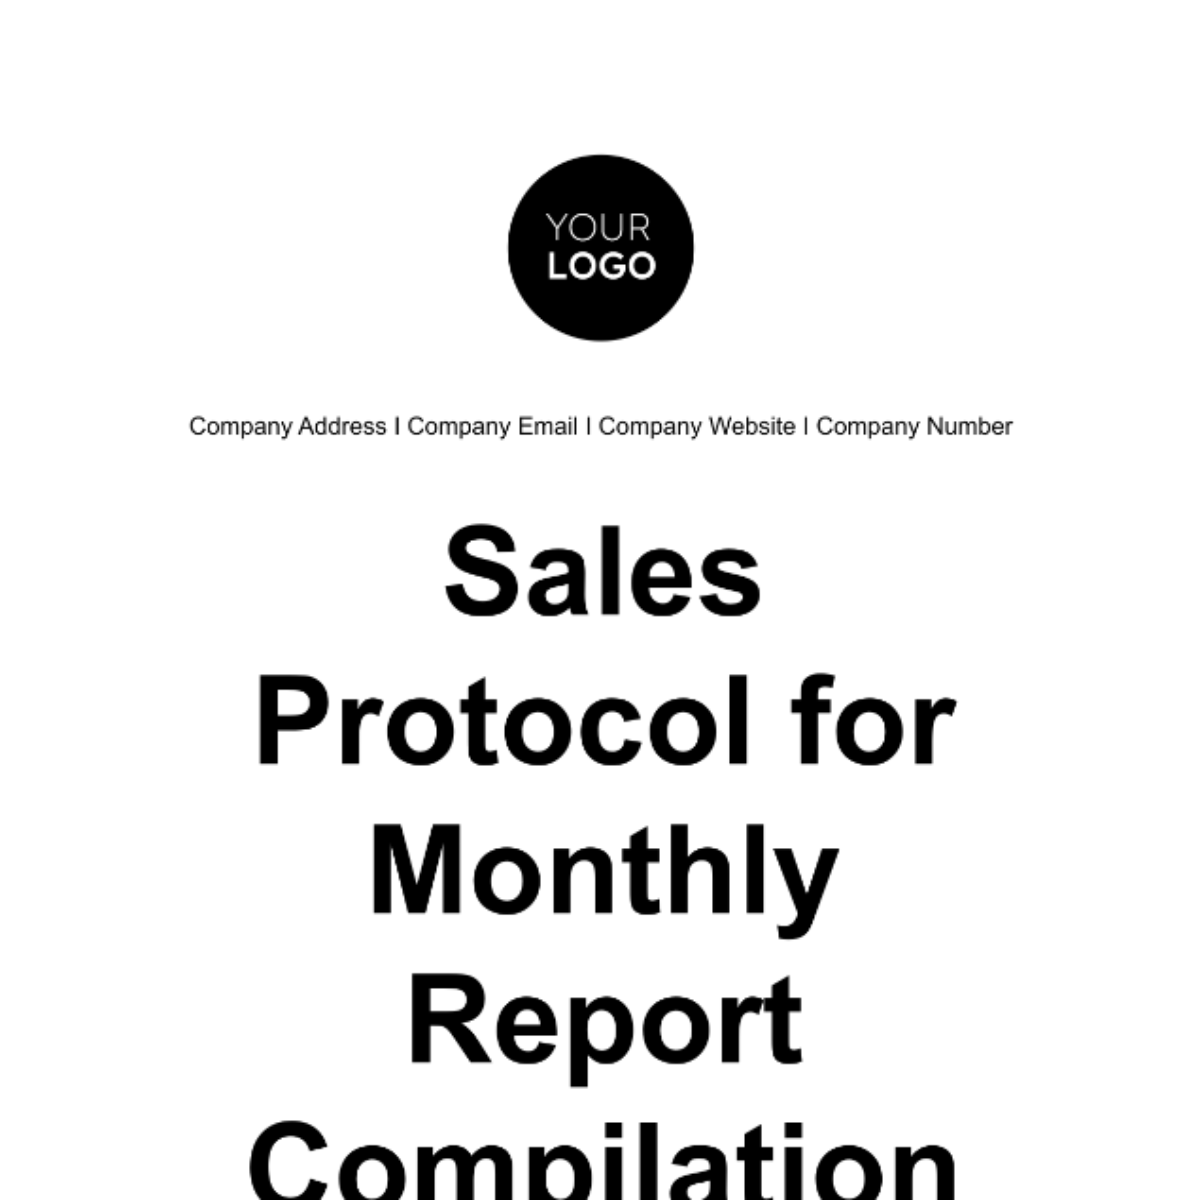 Free Sales Protocol for Monthly Report Compilation Template